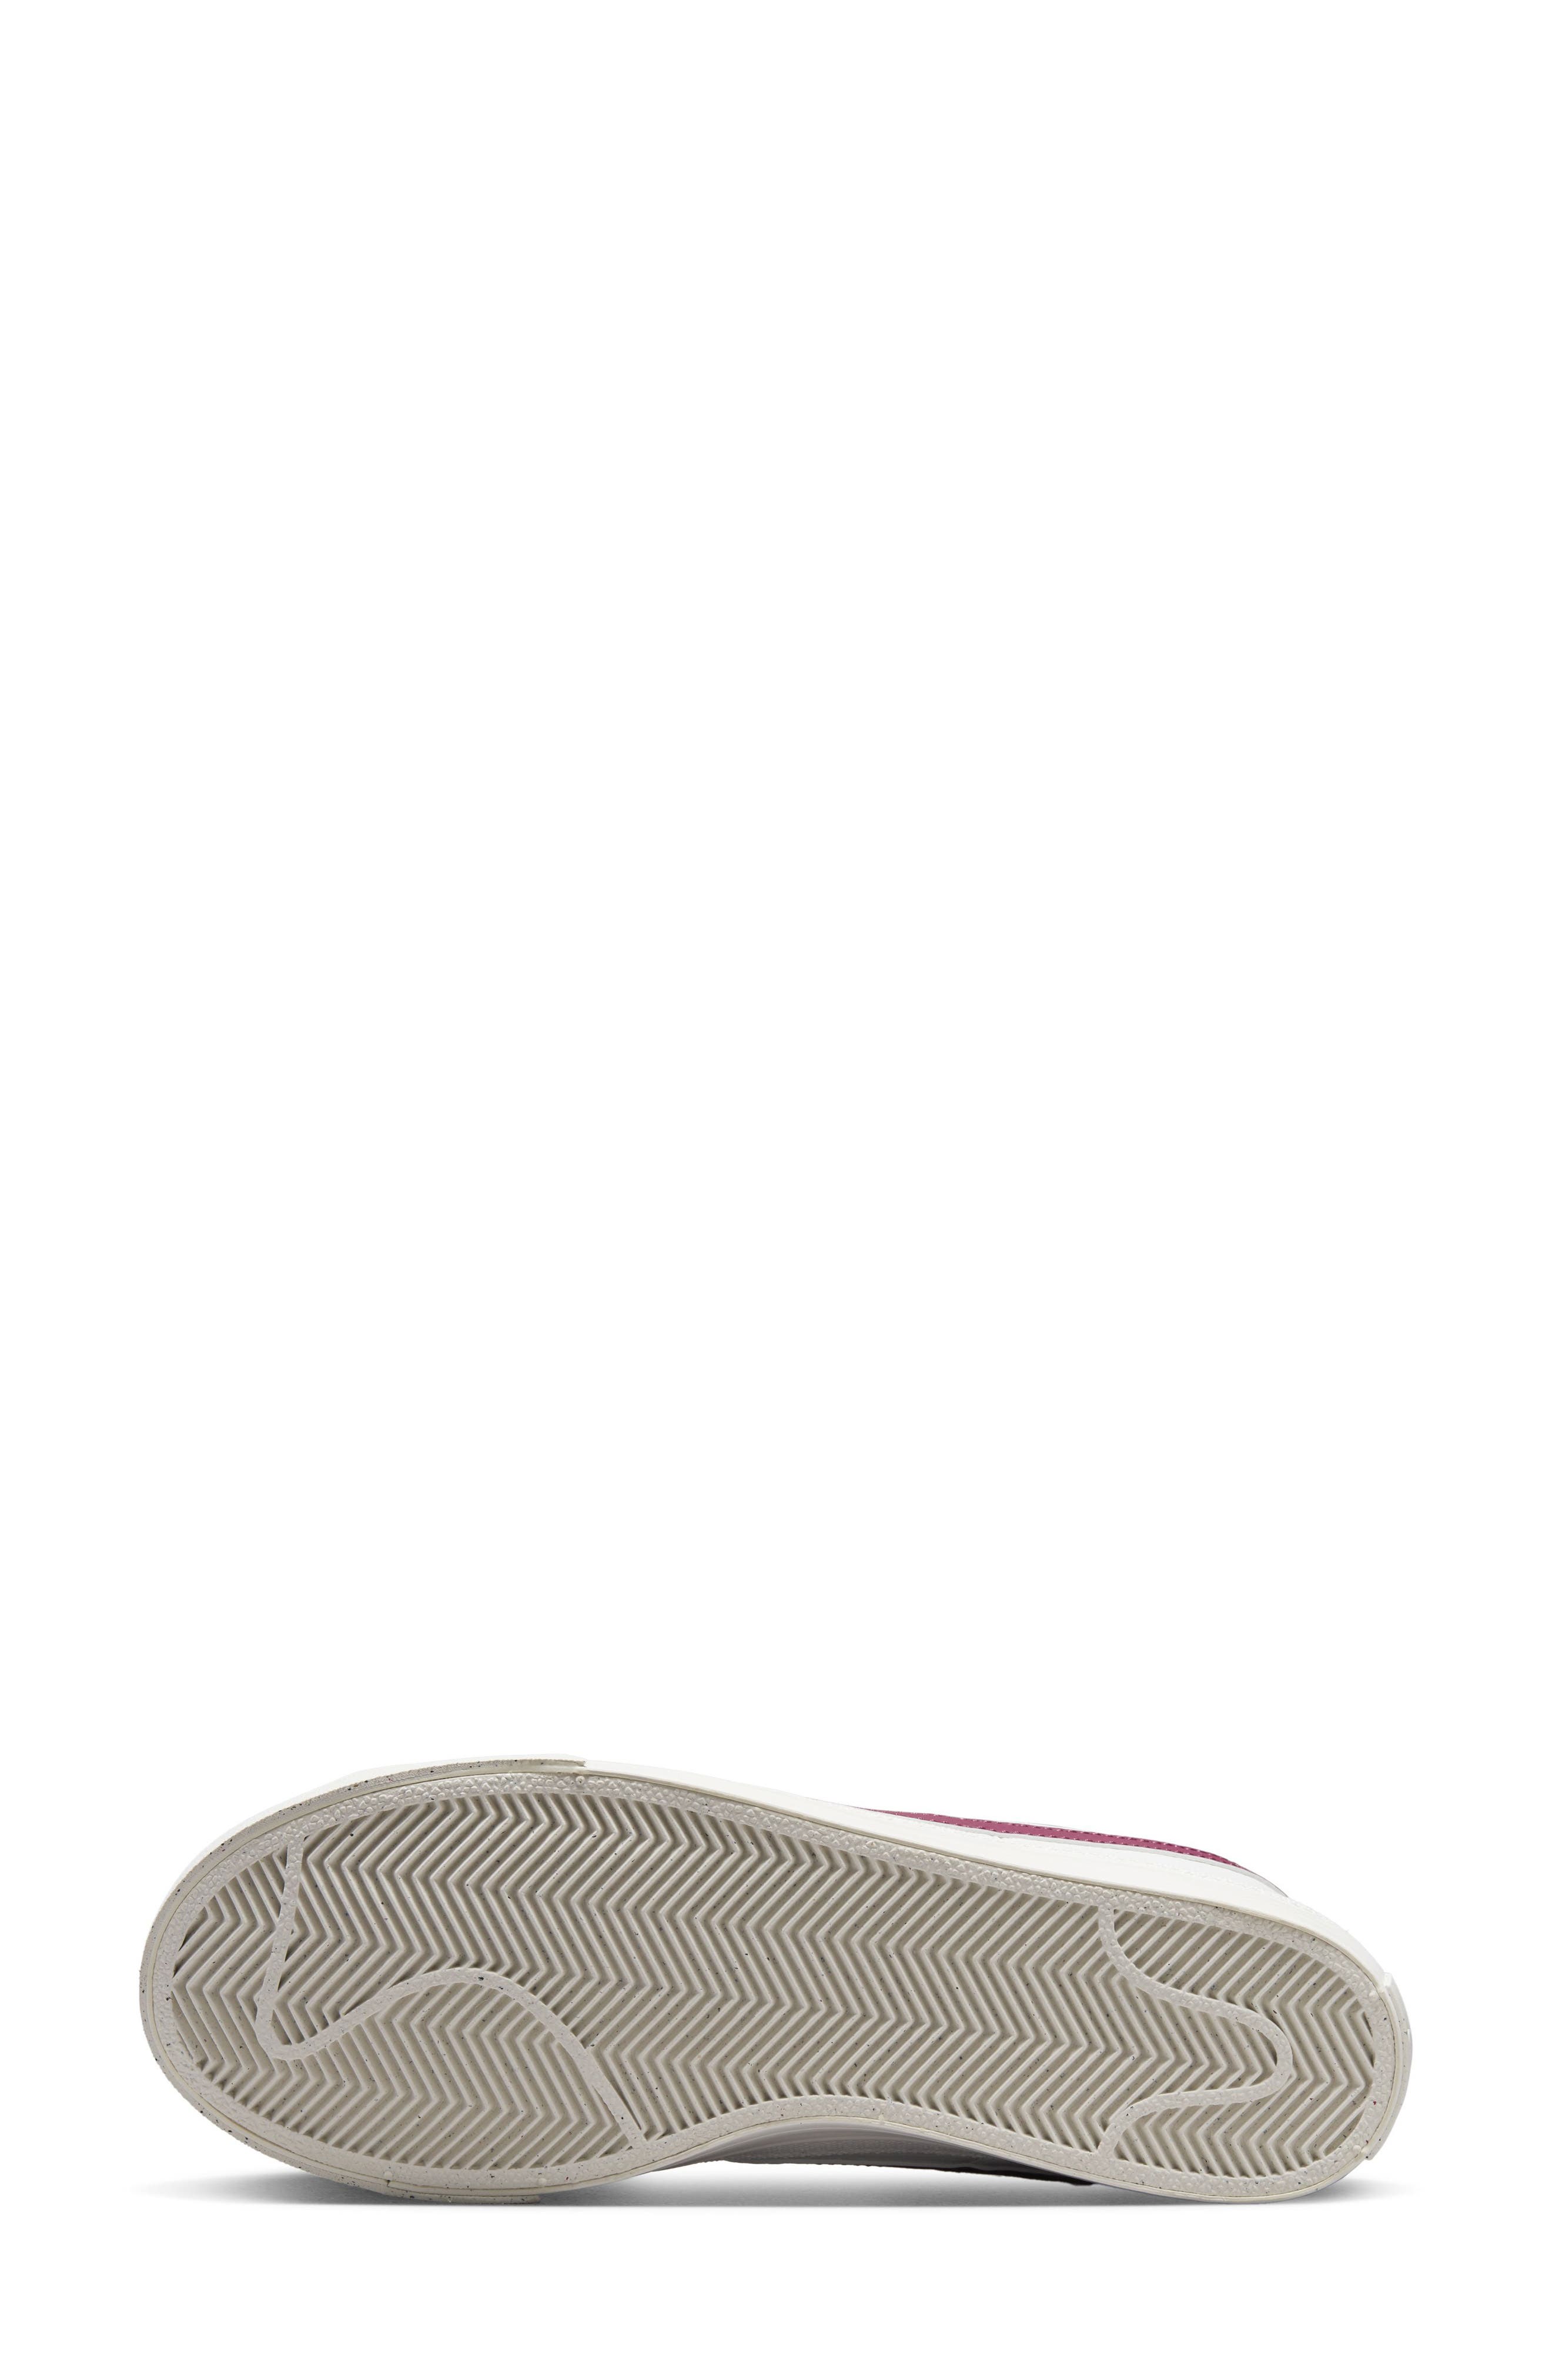 Nike Court Legacy Sneaker in White/Rosewood/Sail/Pink